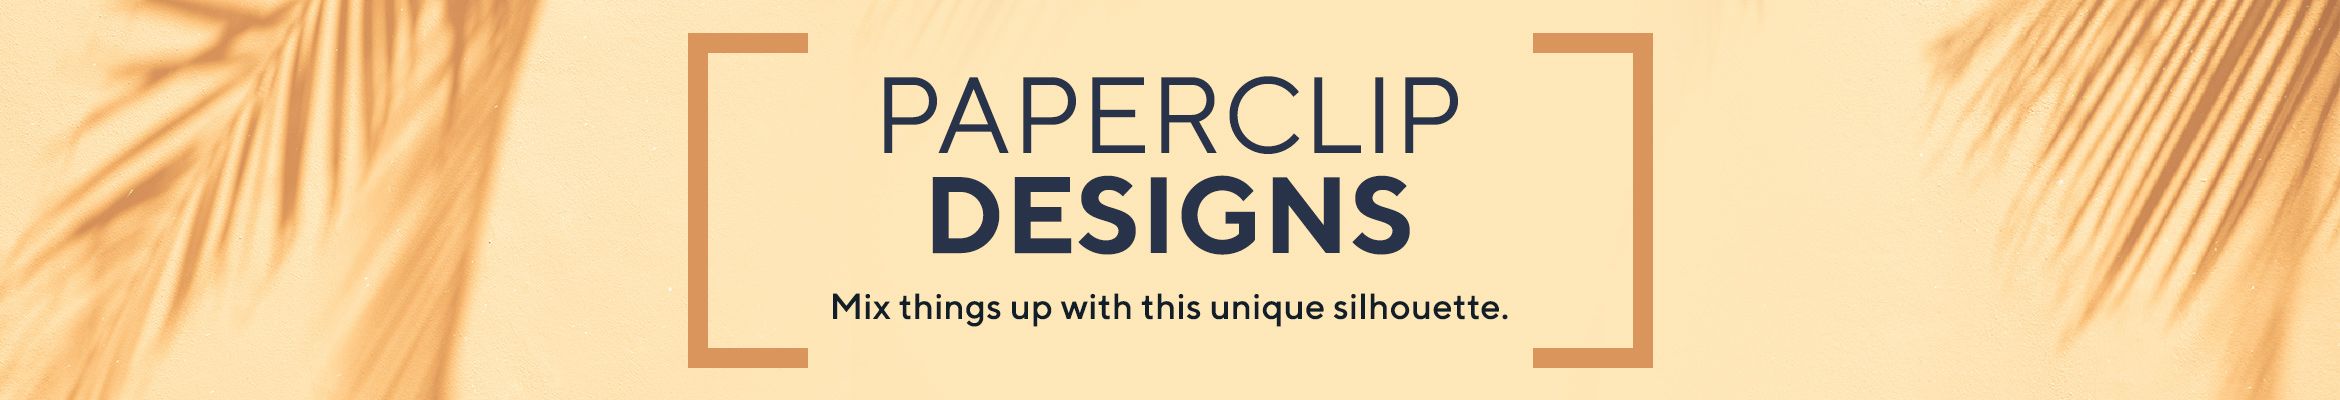 Paperclip Designs.  Mix things up with this unique silhouette.